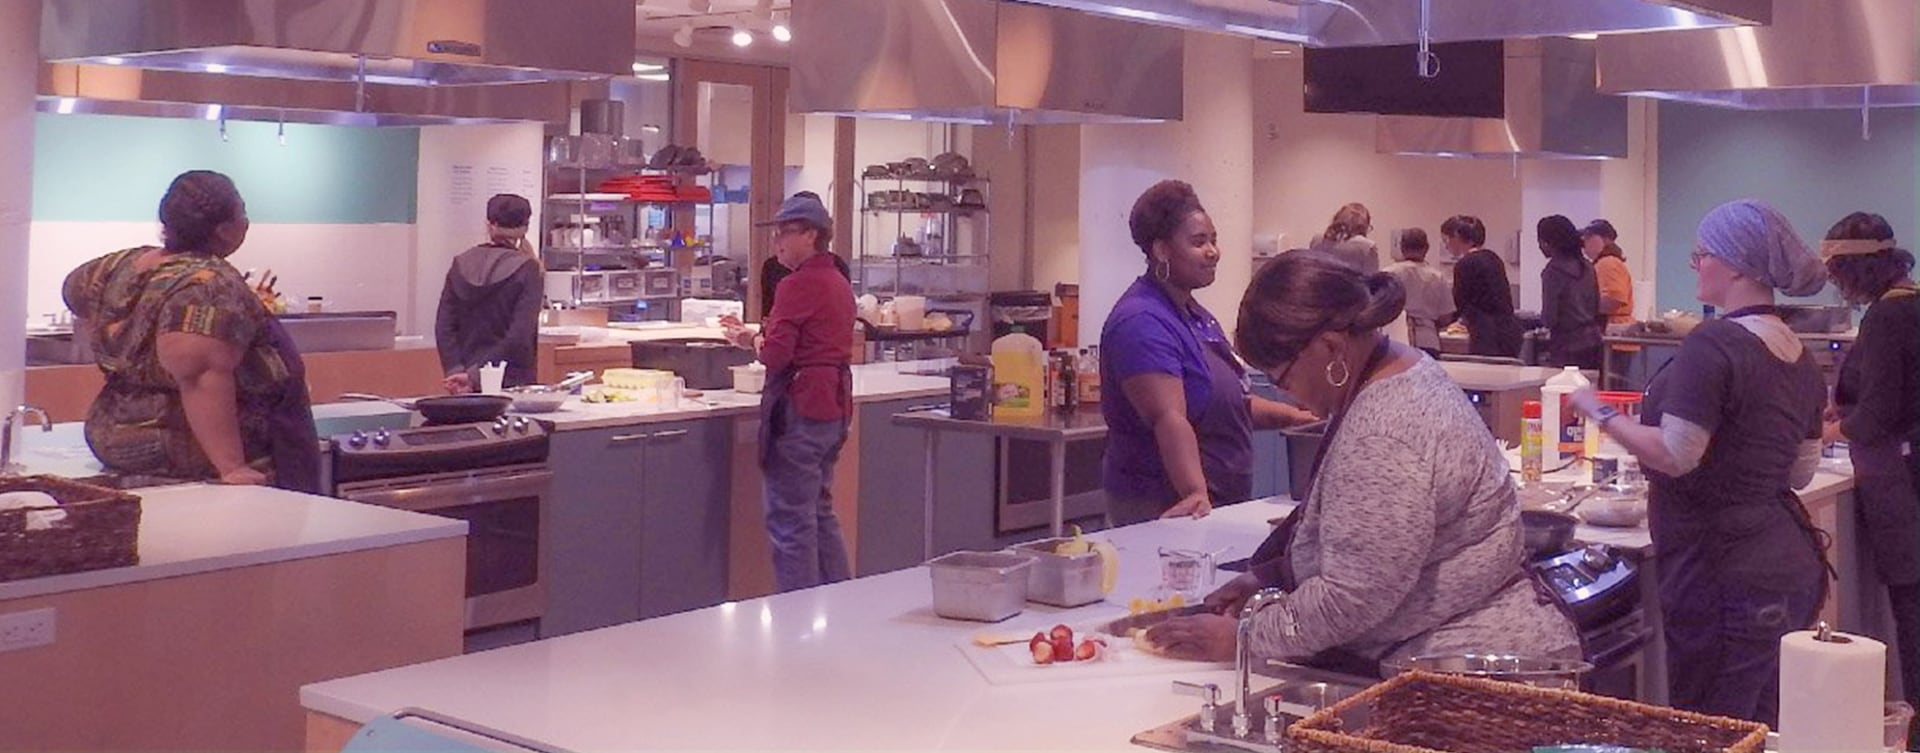 Church Health’s Memphis Teaching Kitchen Promotes Healthy Bodies and Communities